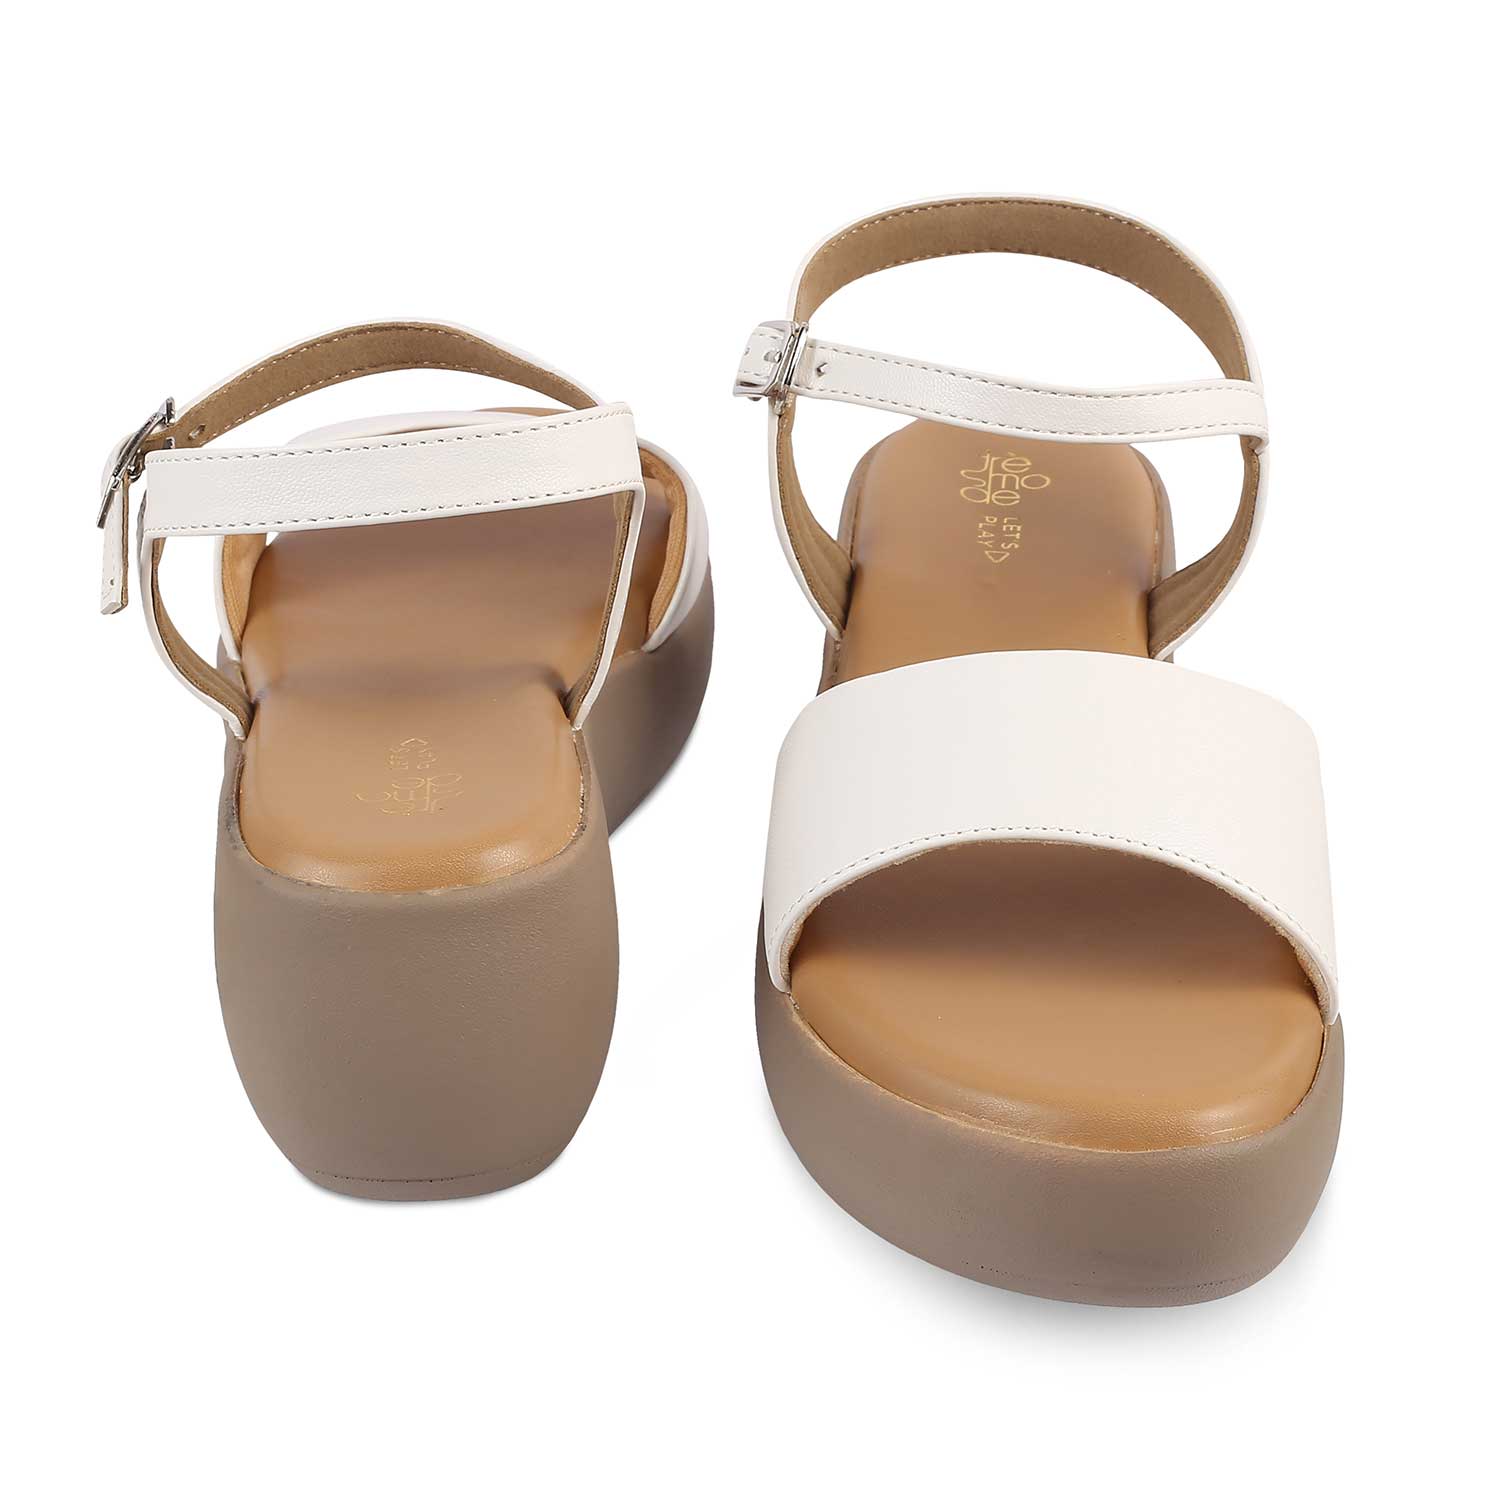 The Simpl White Women's Dress Wedge Sandals Tresmode